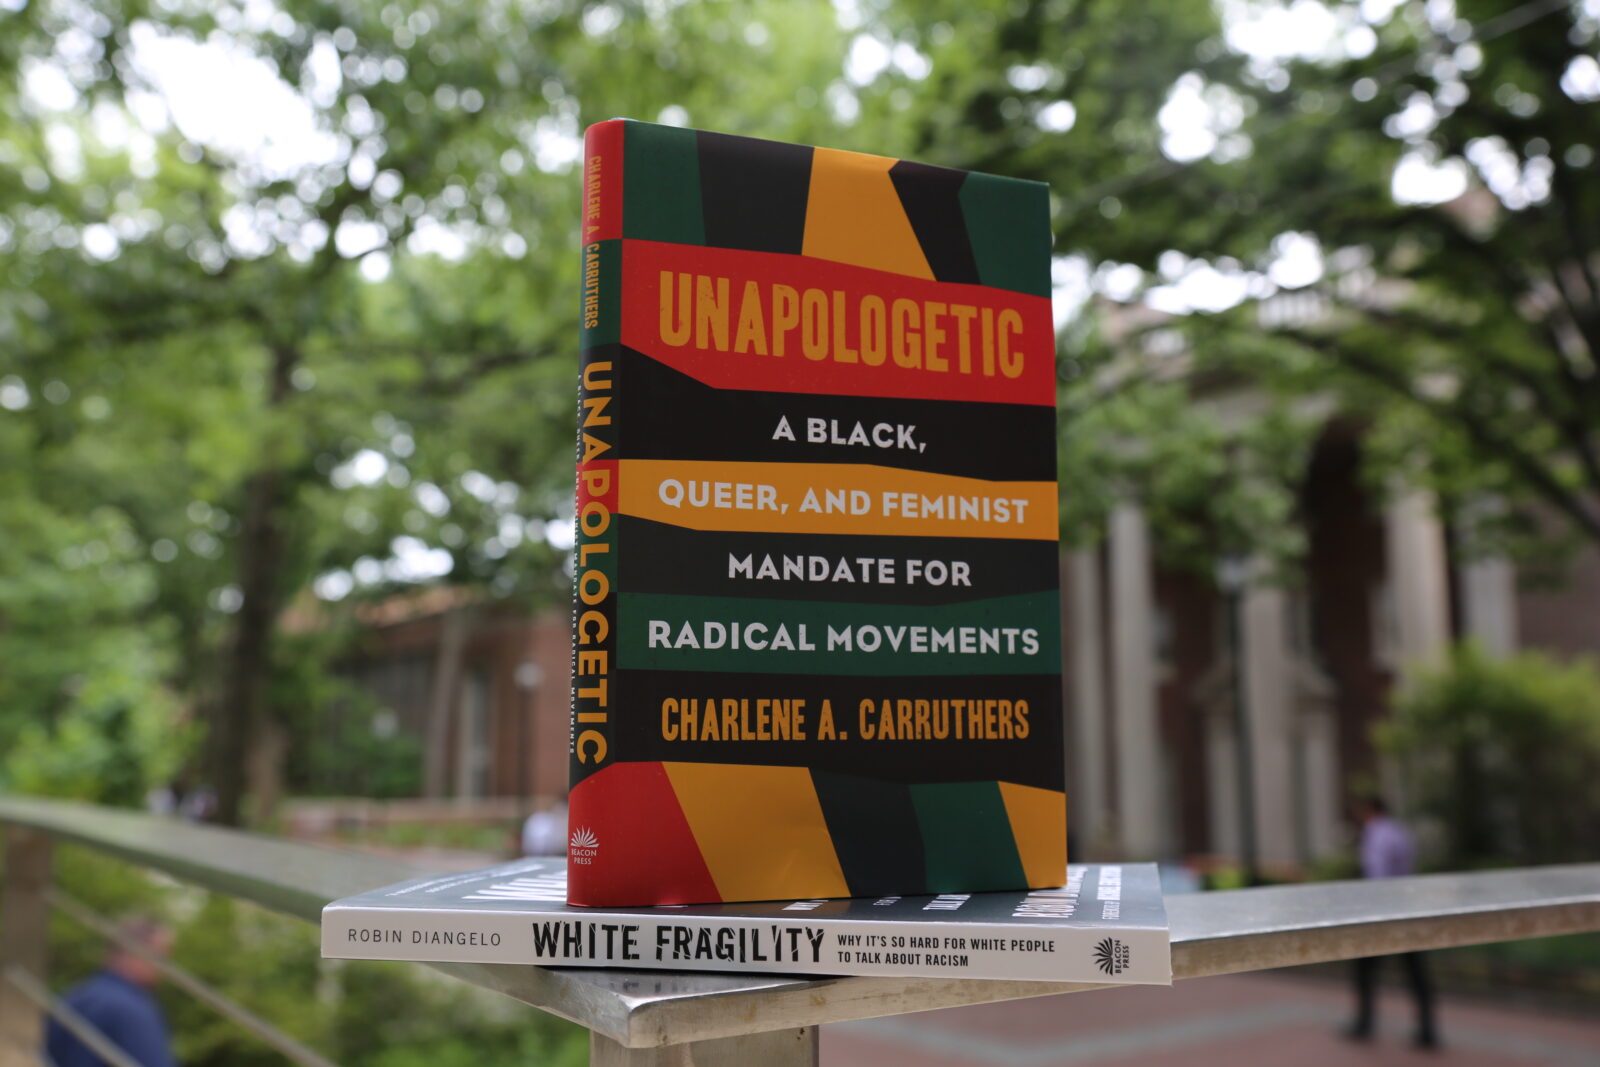 SP2 Task Force-selected books for "One Book, One SP2": Unapologetic and White Fragility